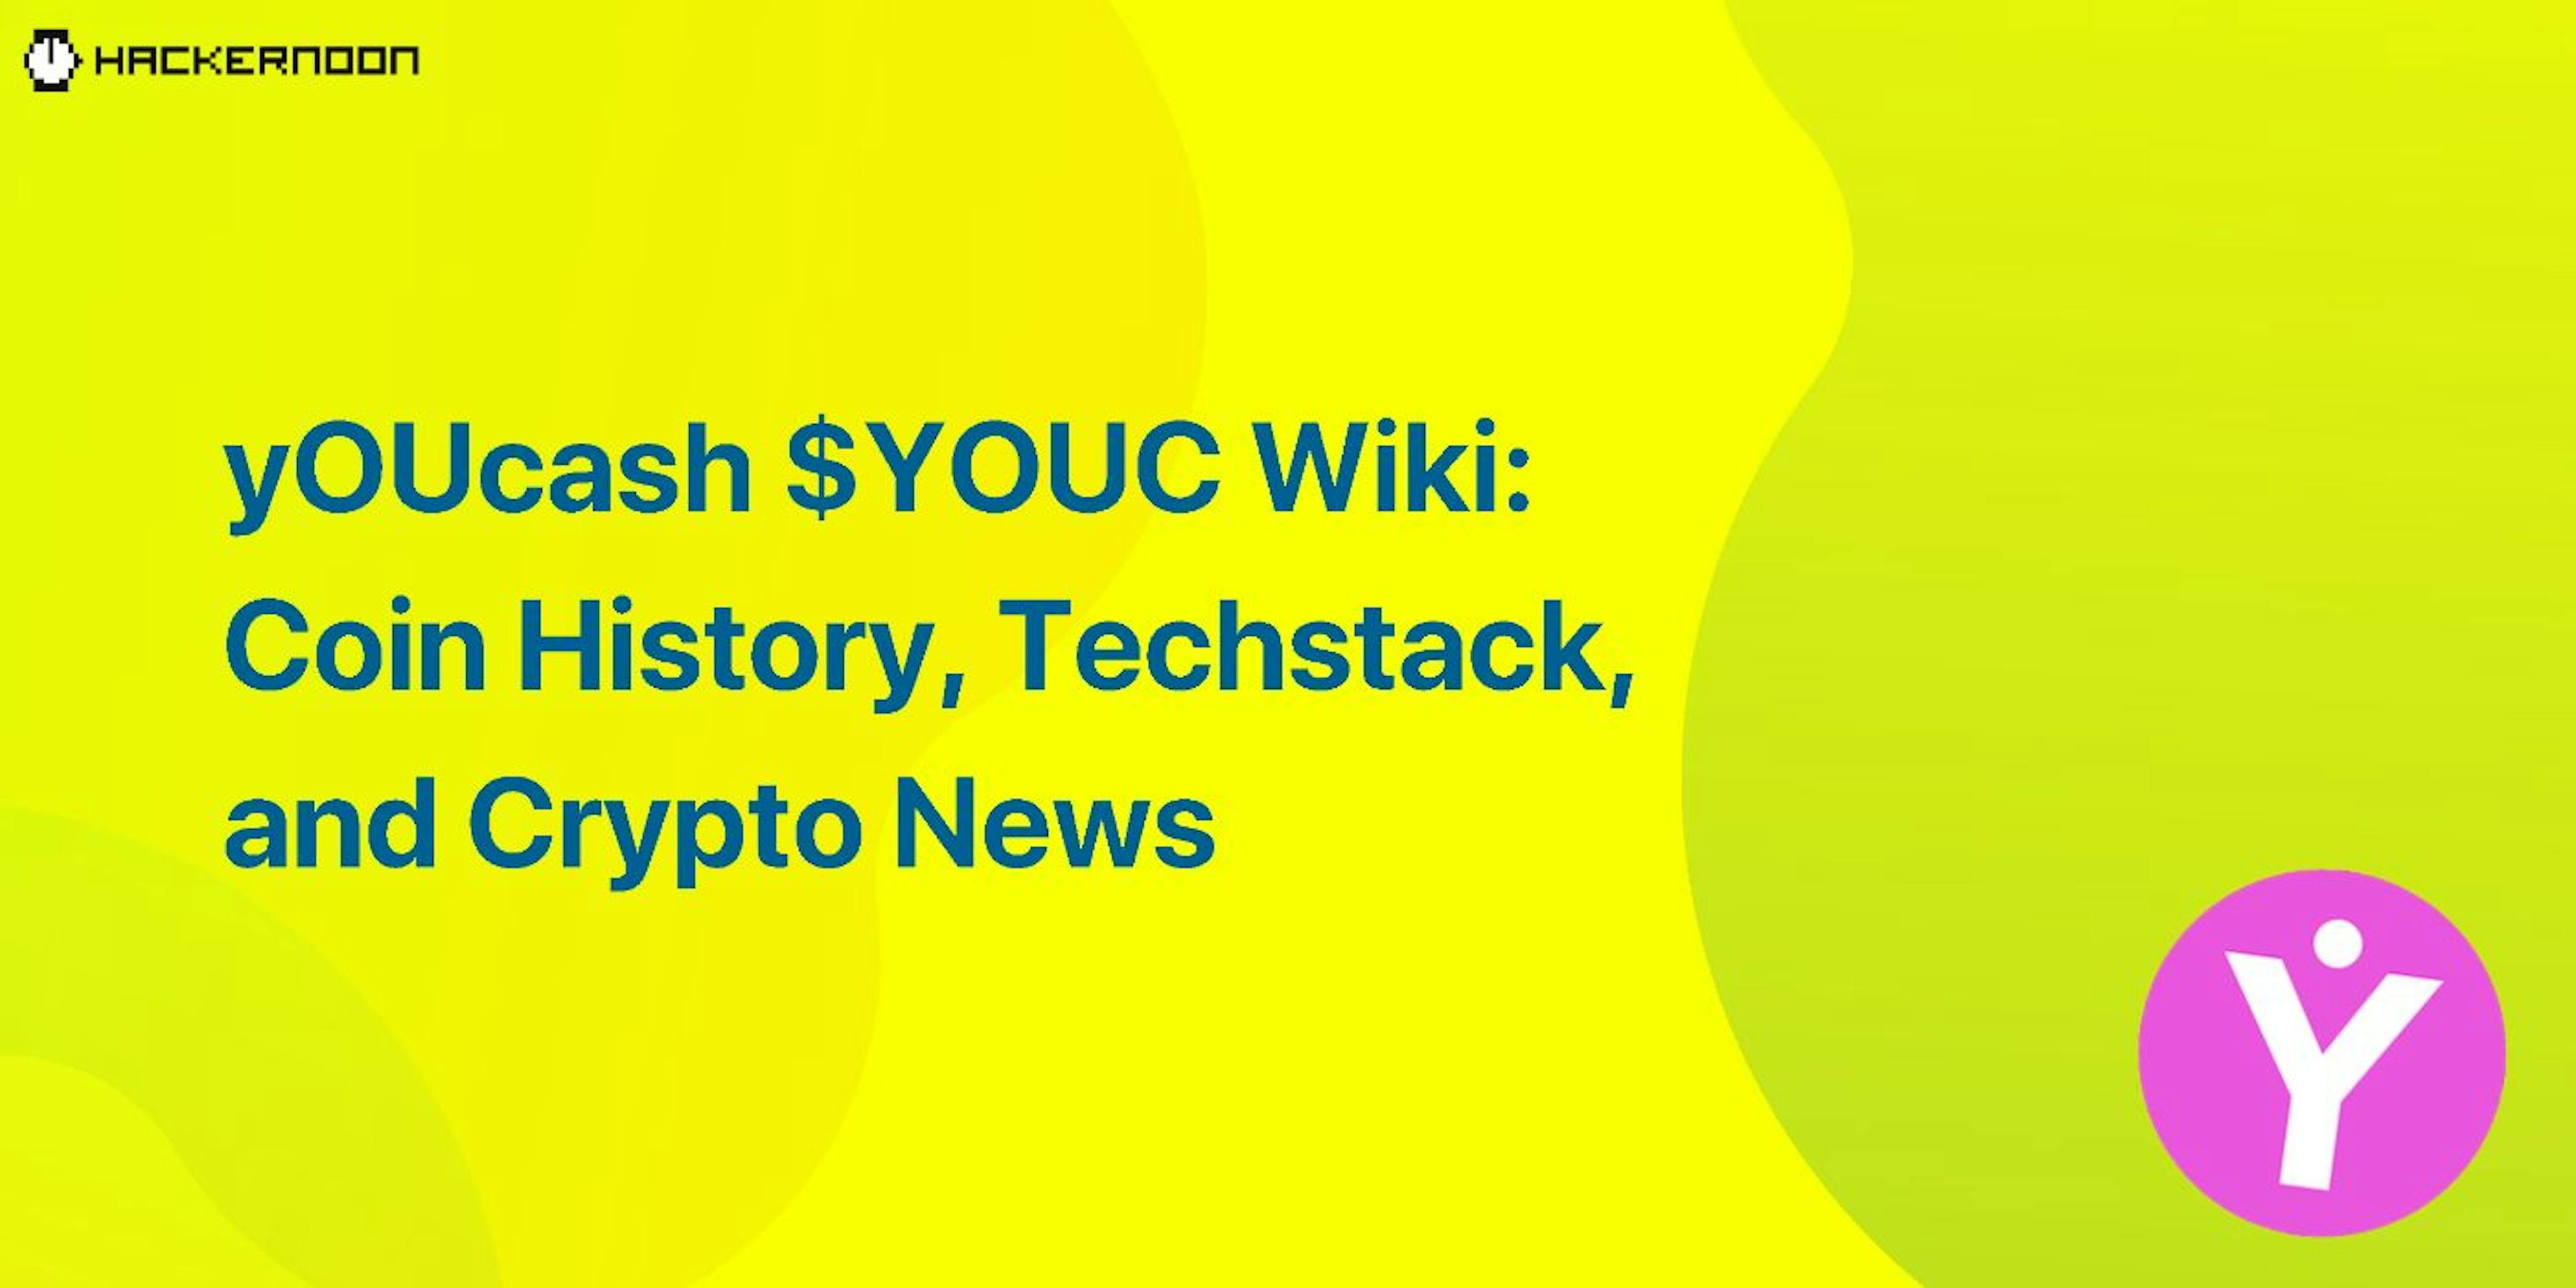 featured image - YOUcash $YOUC Wiki: Coin History, Techstack, and Crypto News